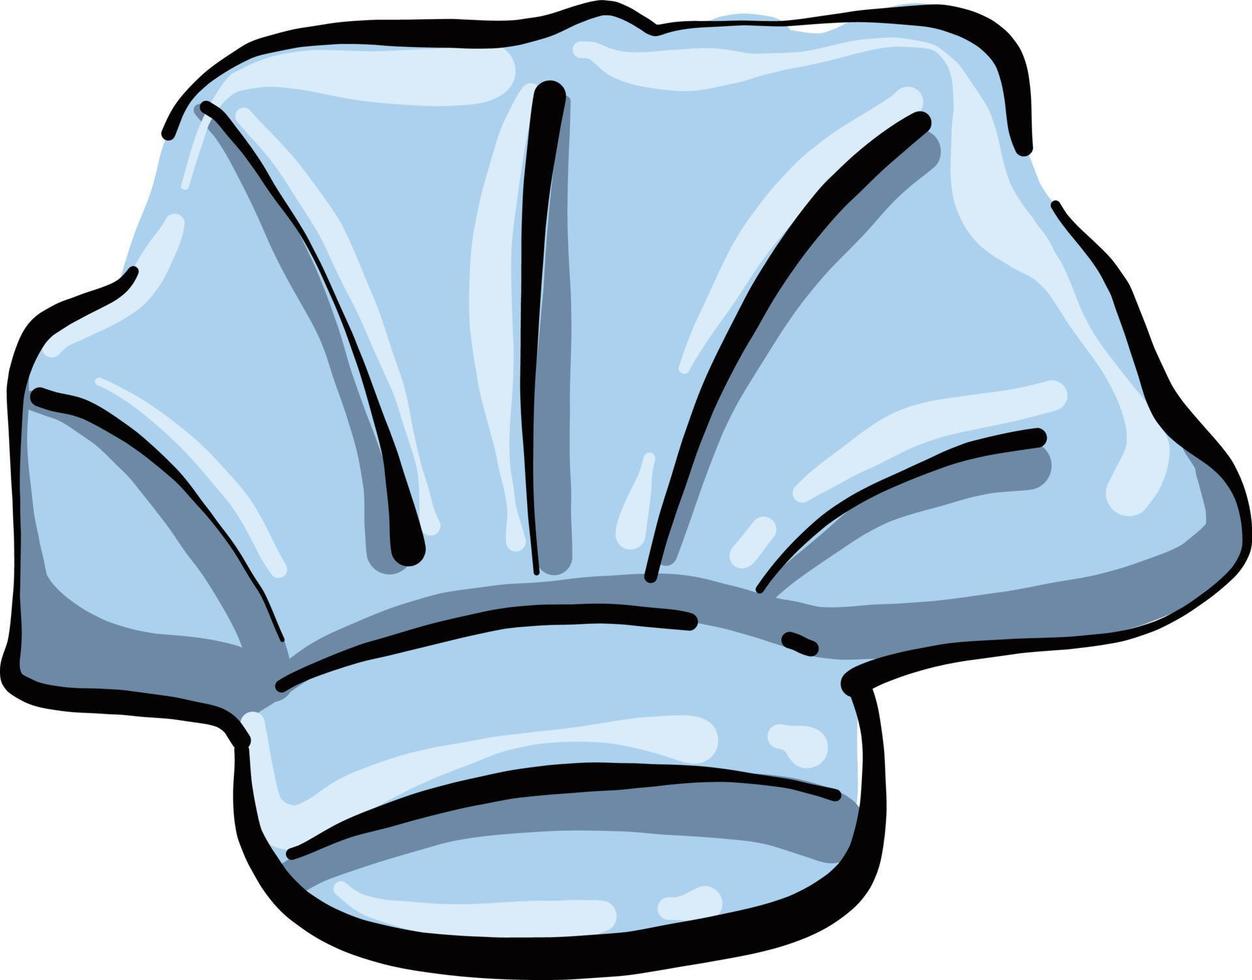 Culinary hat, illustration, vector on a white background.